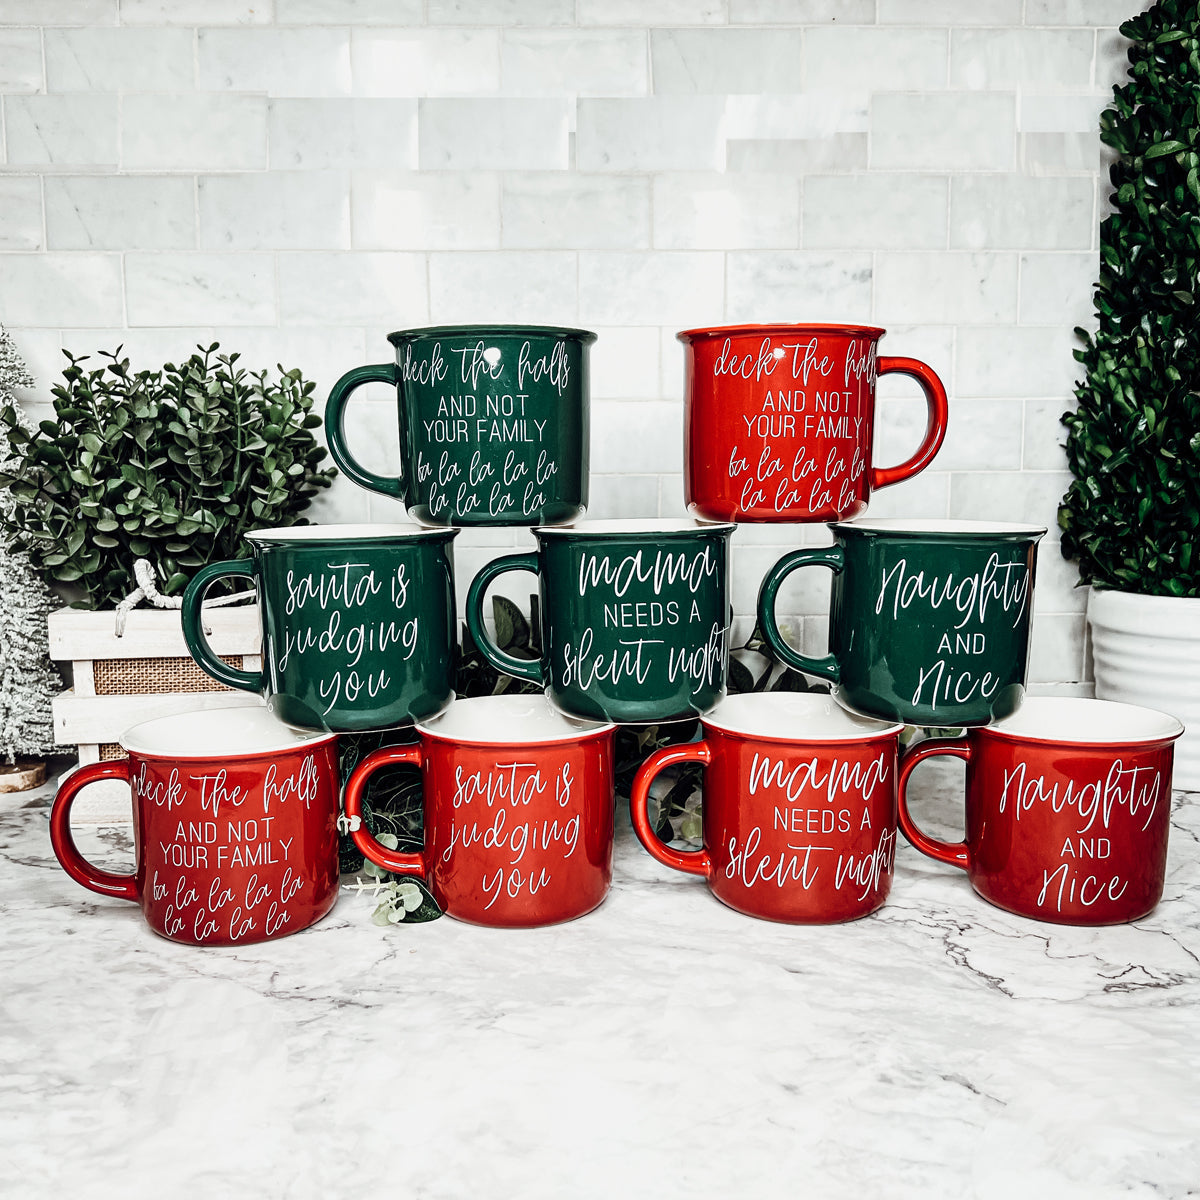 Christmas Coffee Bar Decorating Ideas with Red and Green Ceramic Mugs